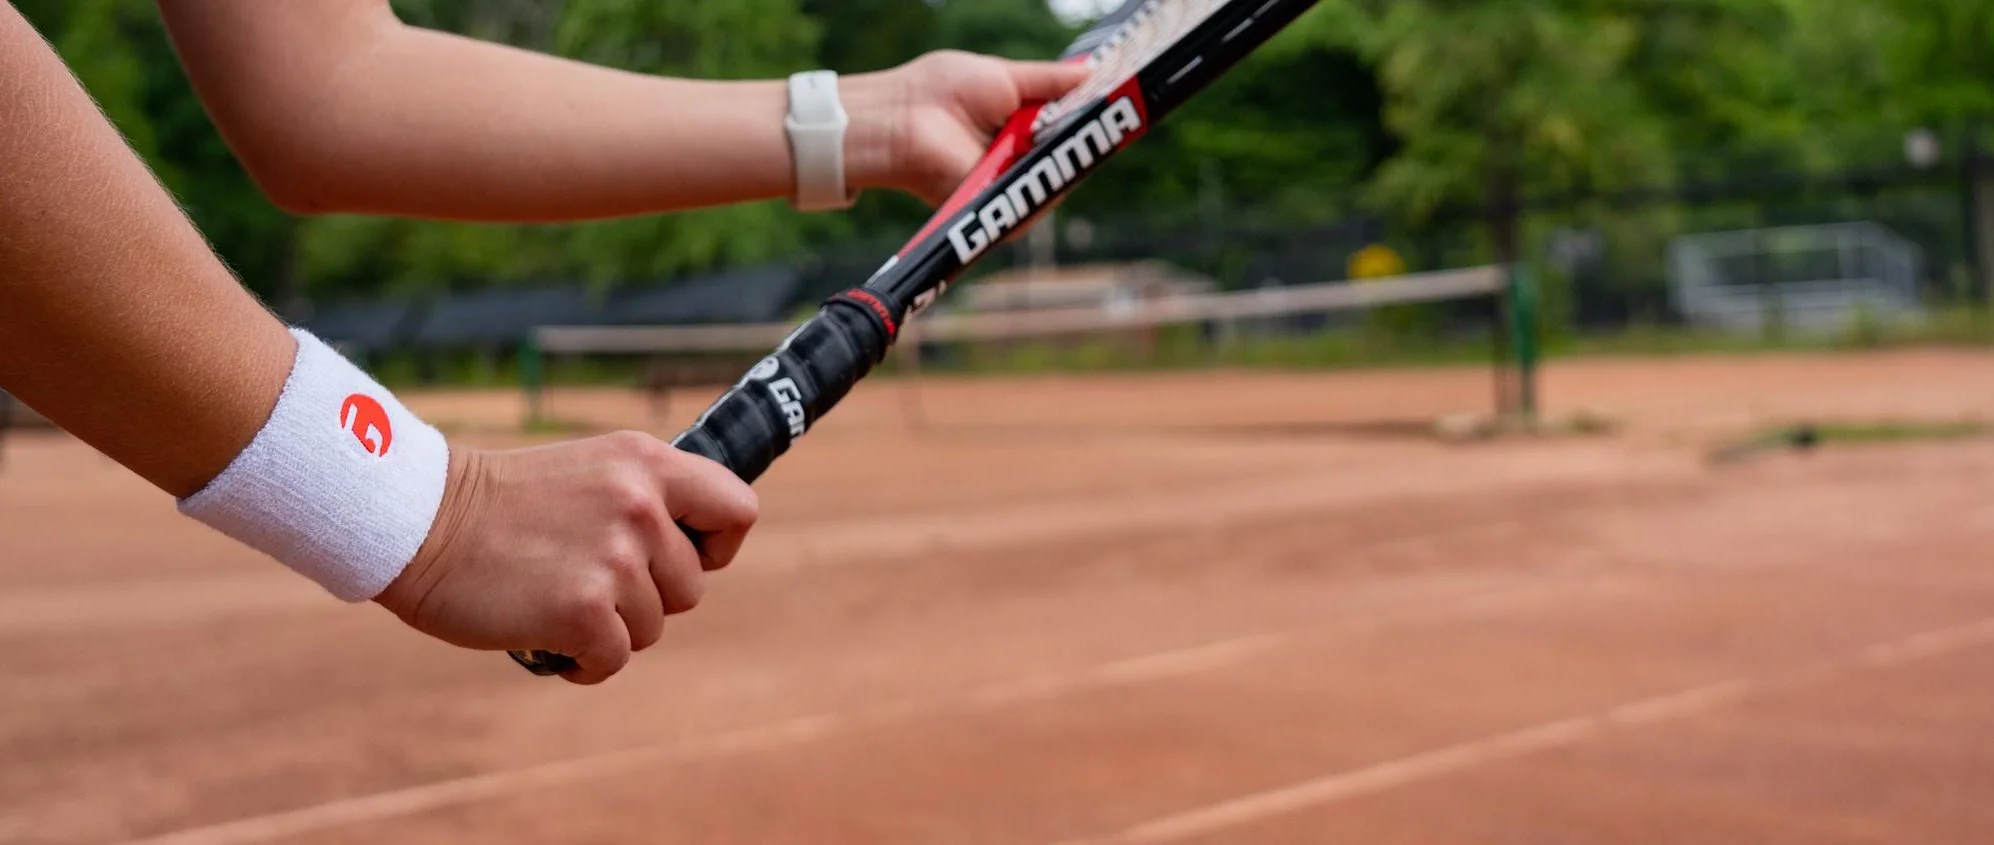 Racora Tennis racket Grip: Your Partner in Pursuing Tennis Mastery and Joy